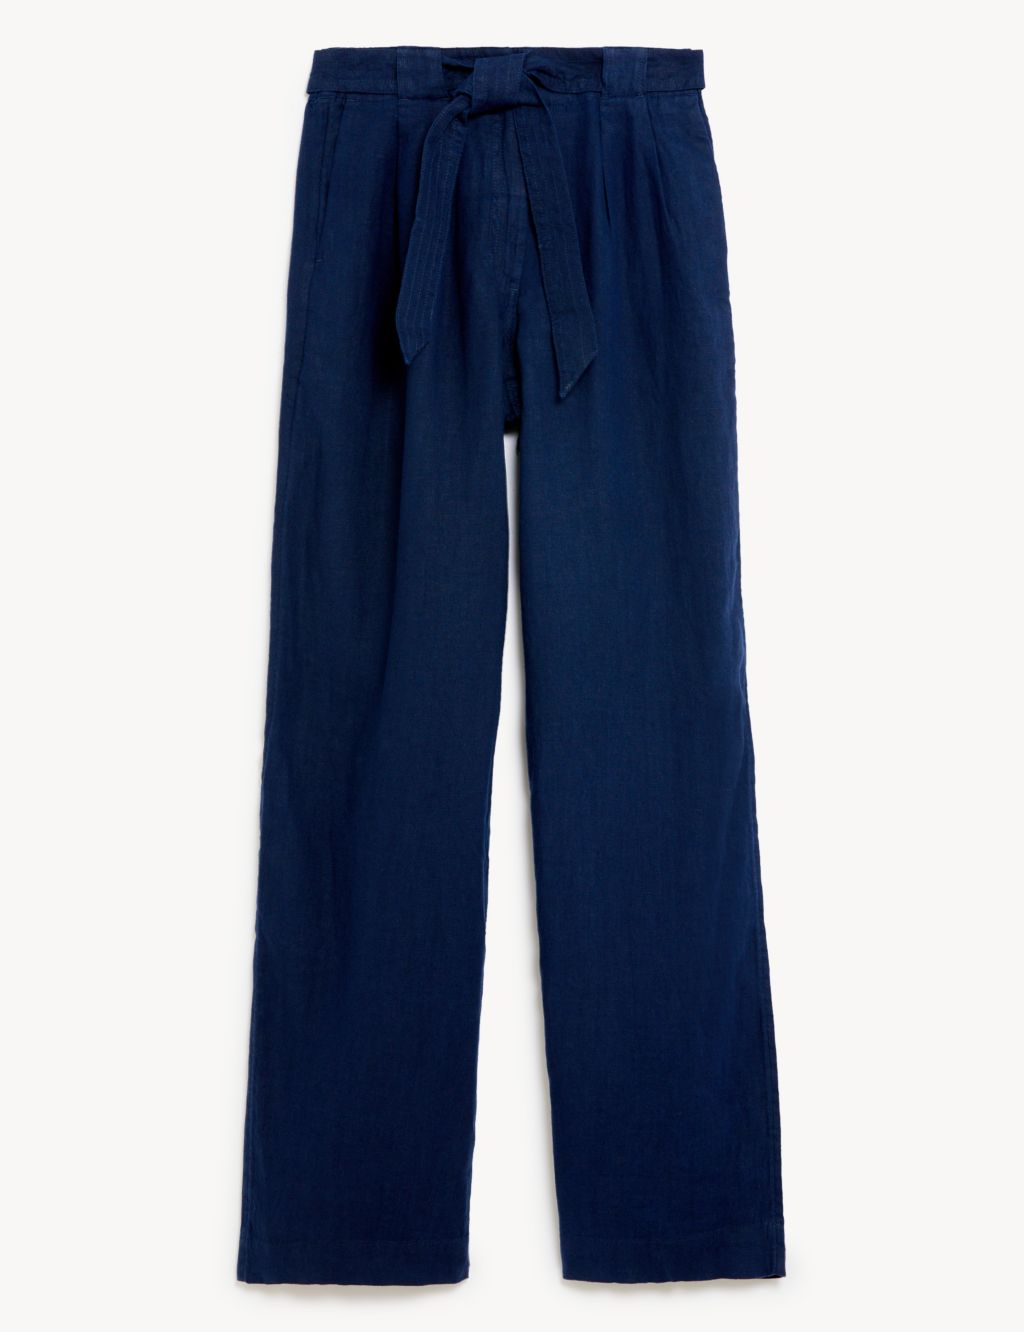 Pure Linen Belted Wide Leg Trousers image 2